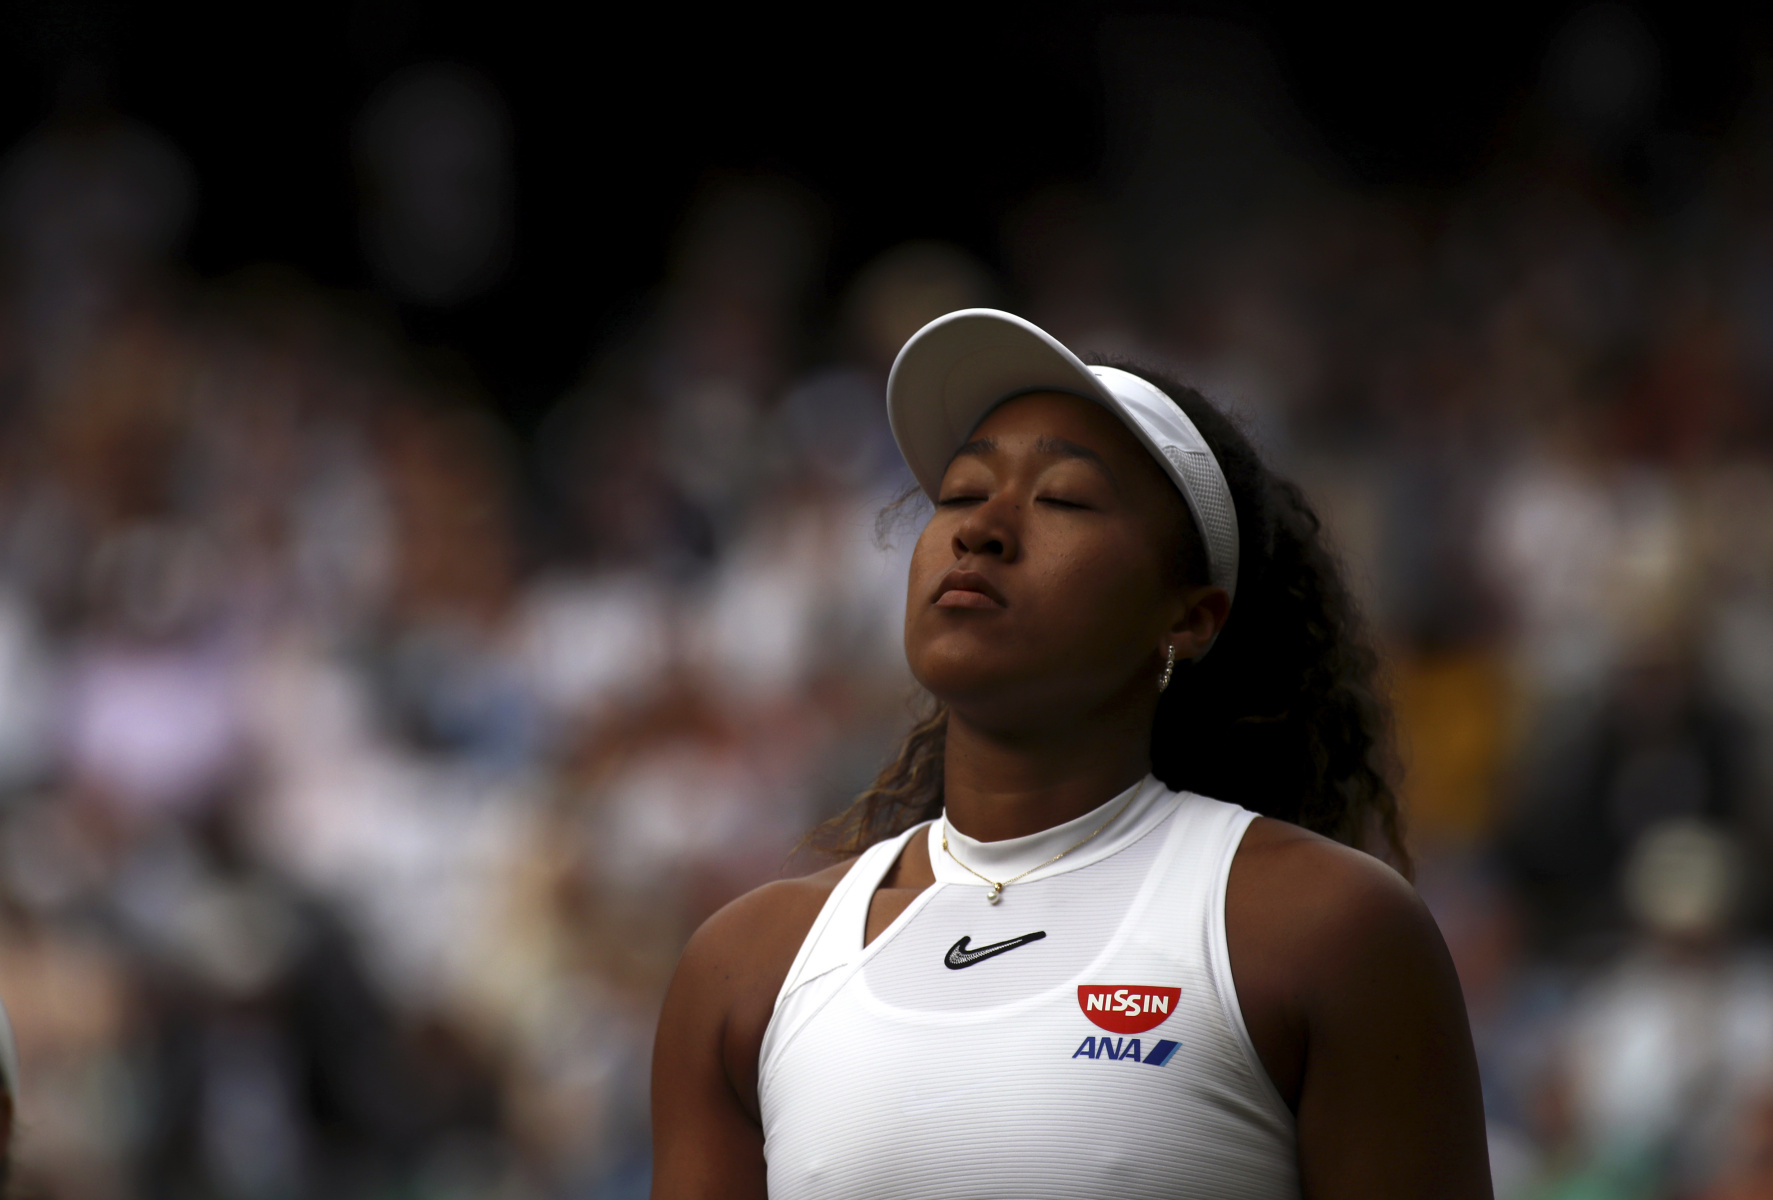  : Tennis : Photography by Adam Stoltman: Sports Photography, The Arts, Portraiture, Travel, Photojournalism and Fine Art in New York